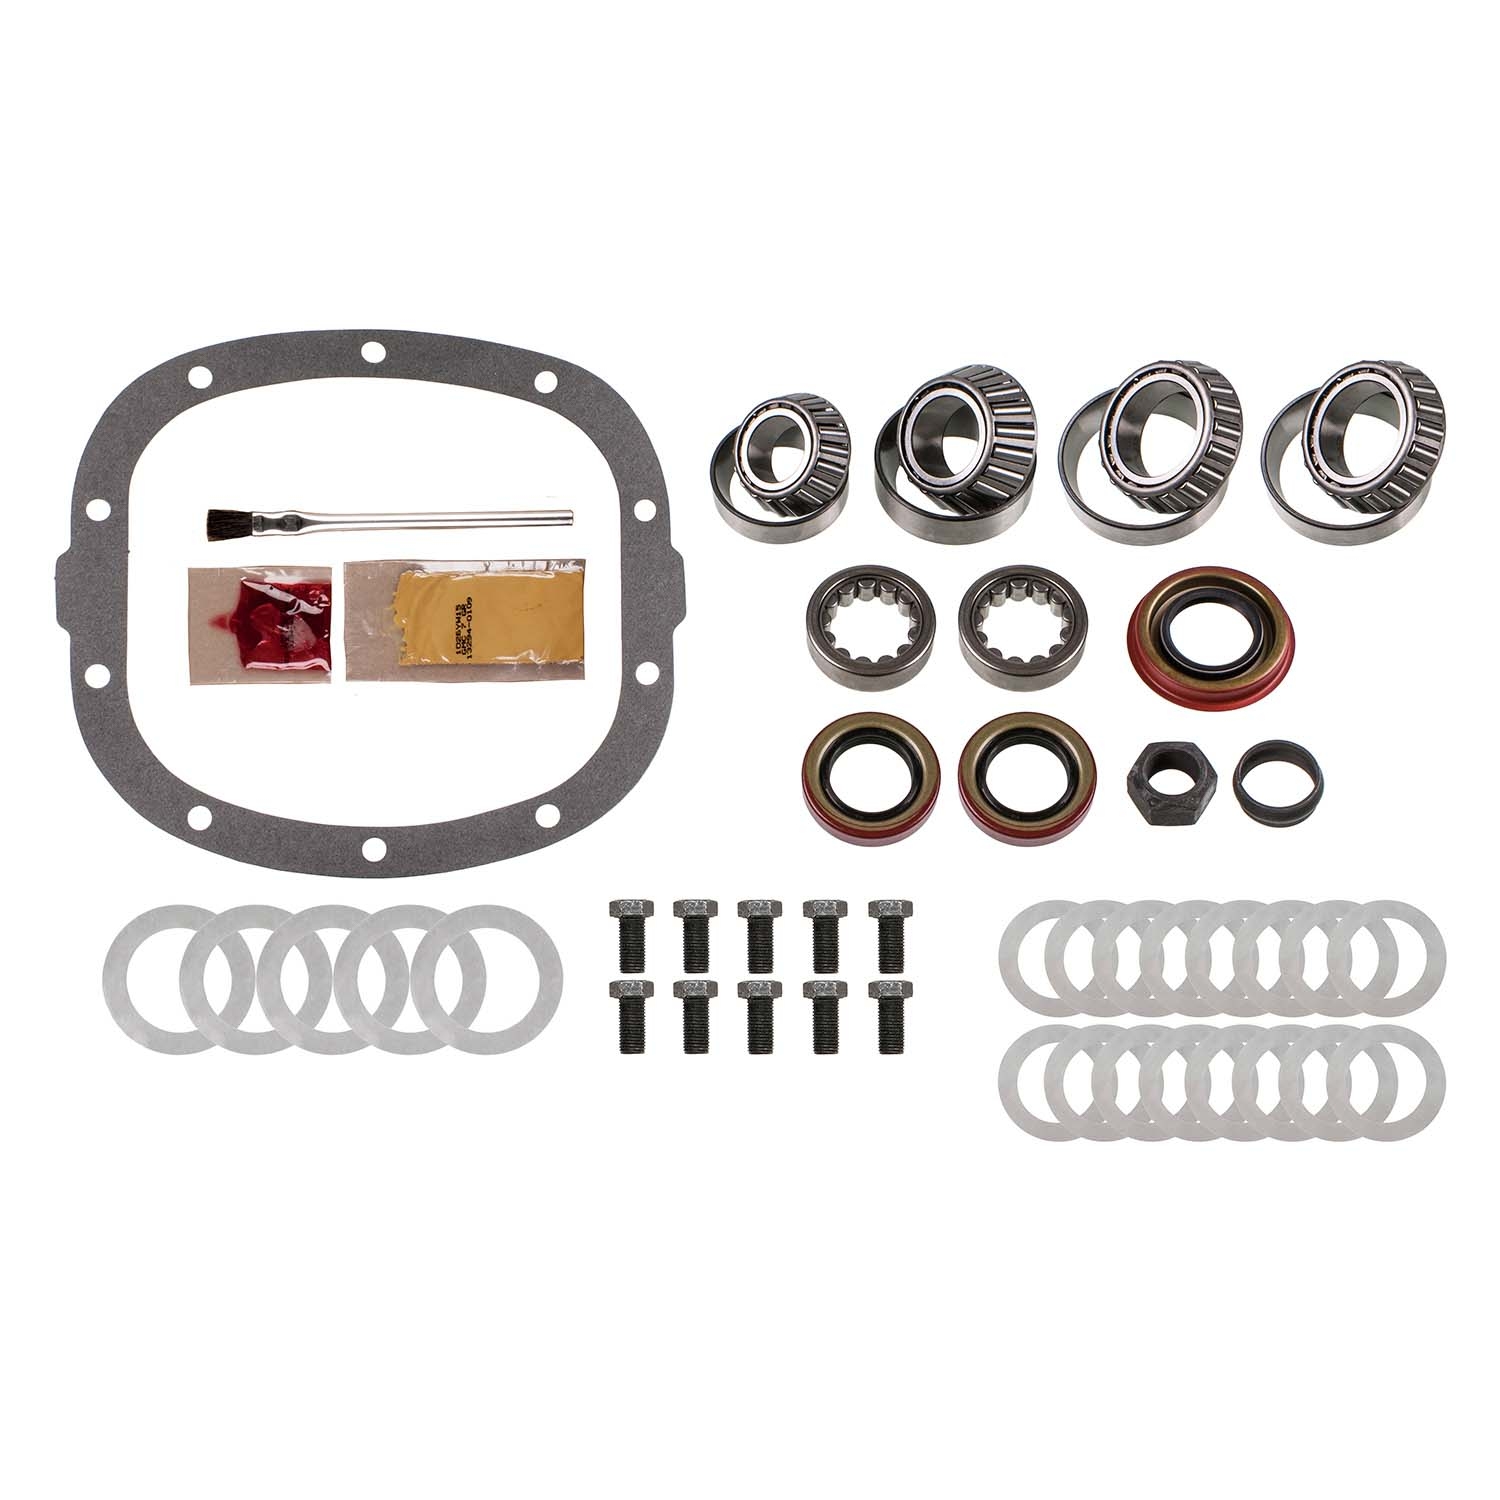 Motive Gear Differential Bearing Kits Gm 7.5 | Sk Gm 7.5